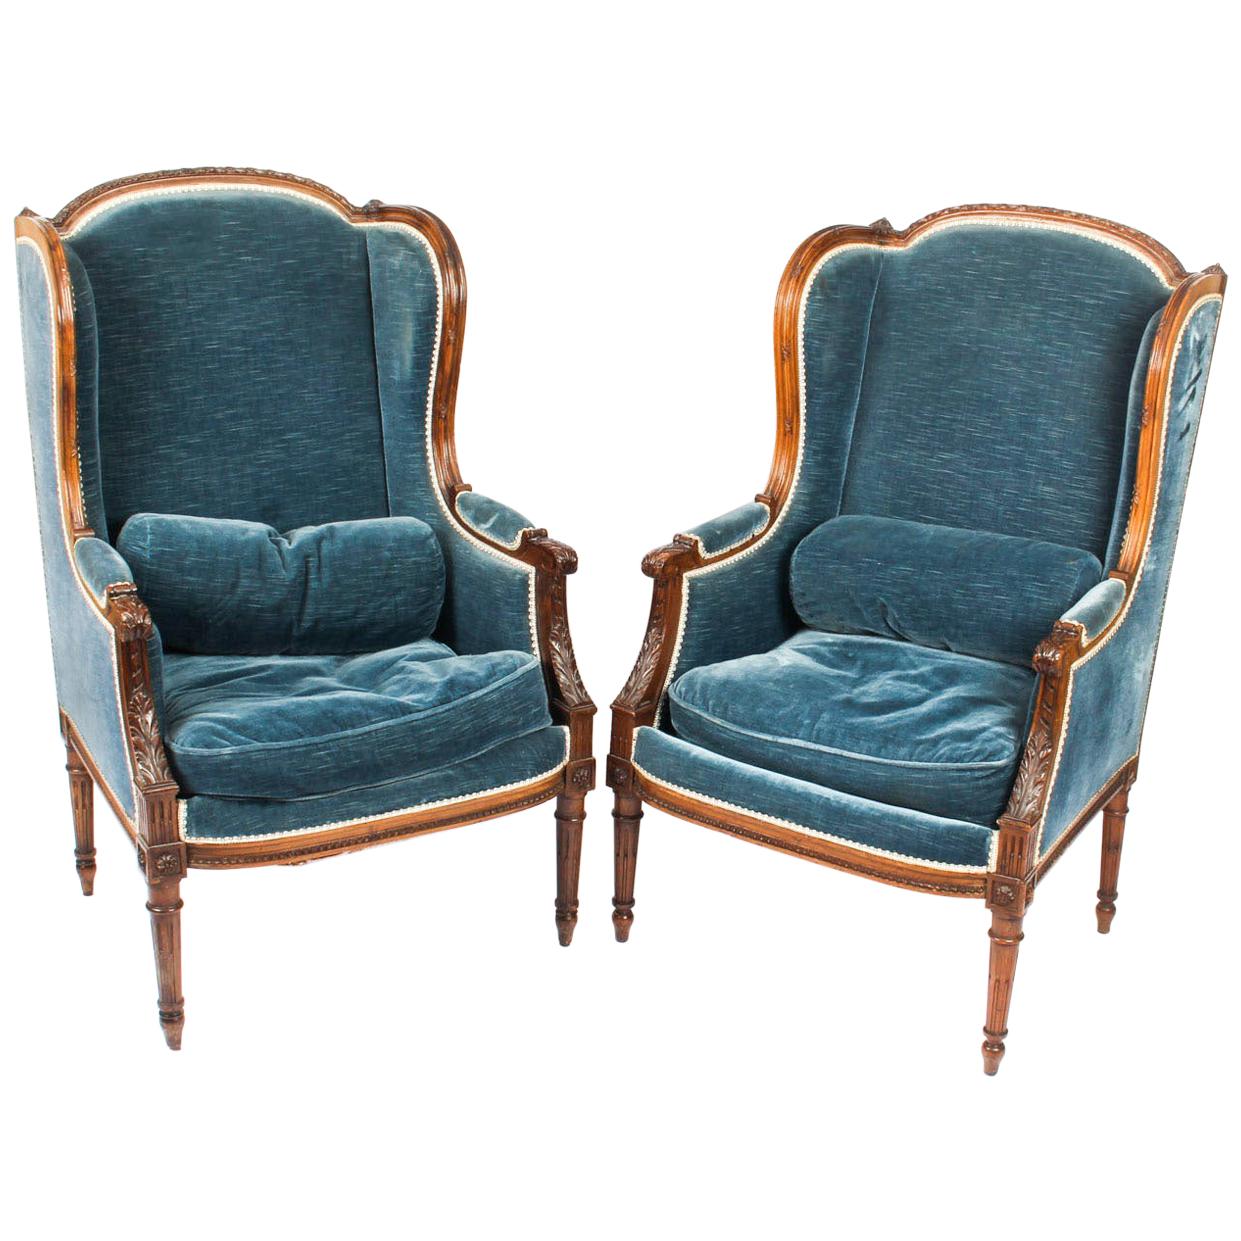 Antique Pair of Louis XV Revival Fauteuil Wingback Armchairs, 19th Century